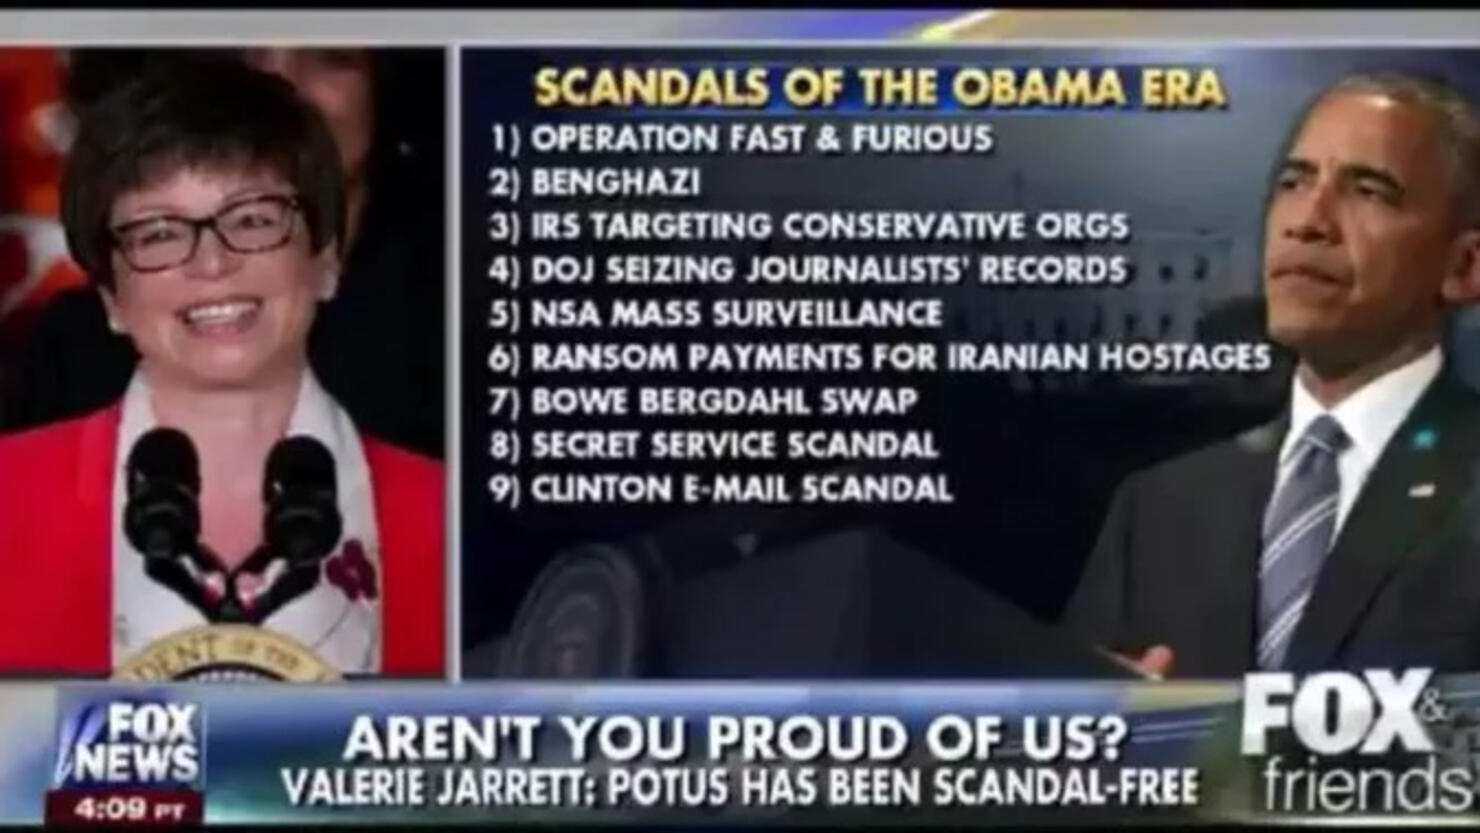 12 Actual Scandals of the 'Scandal-Free' Obama Administration | iHeart